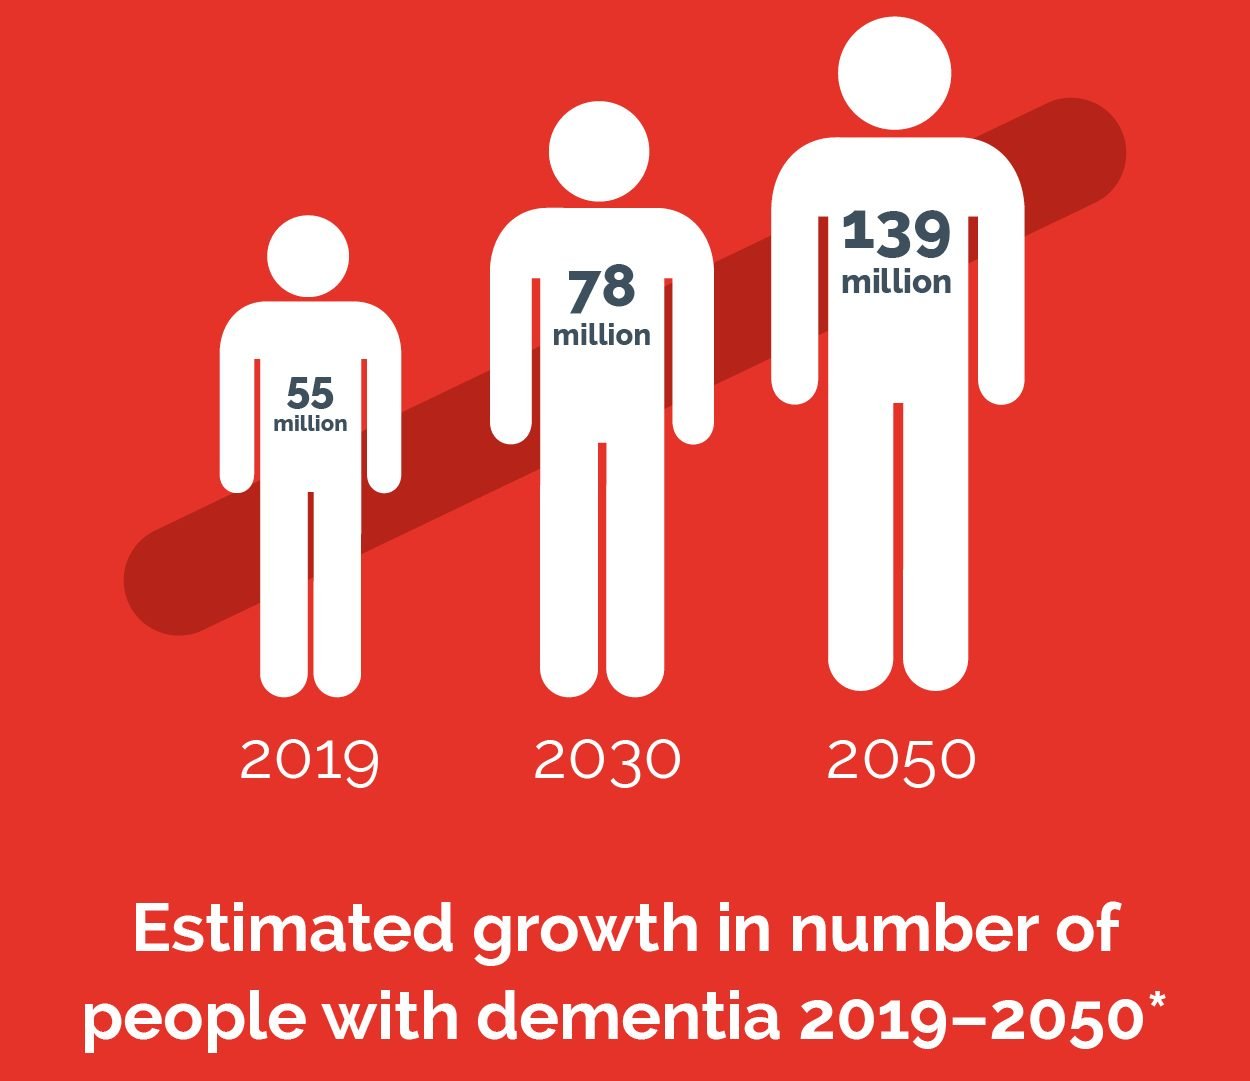 what are the latest major findings of dementia research